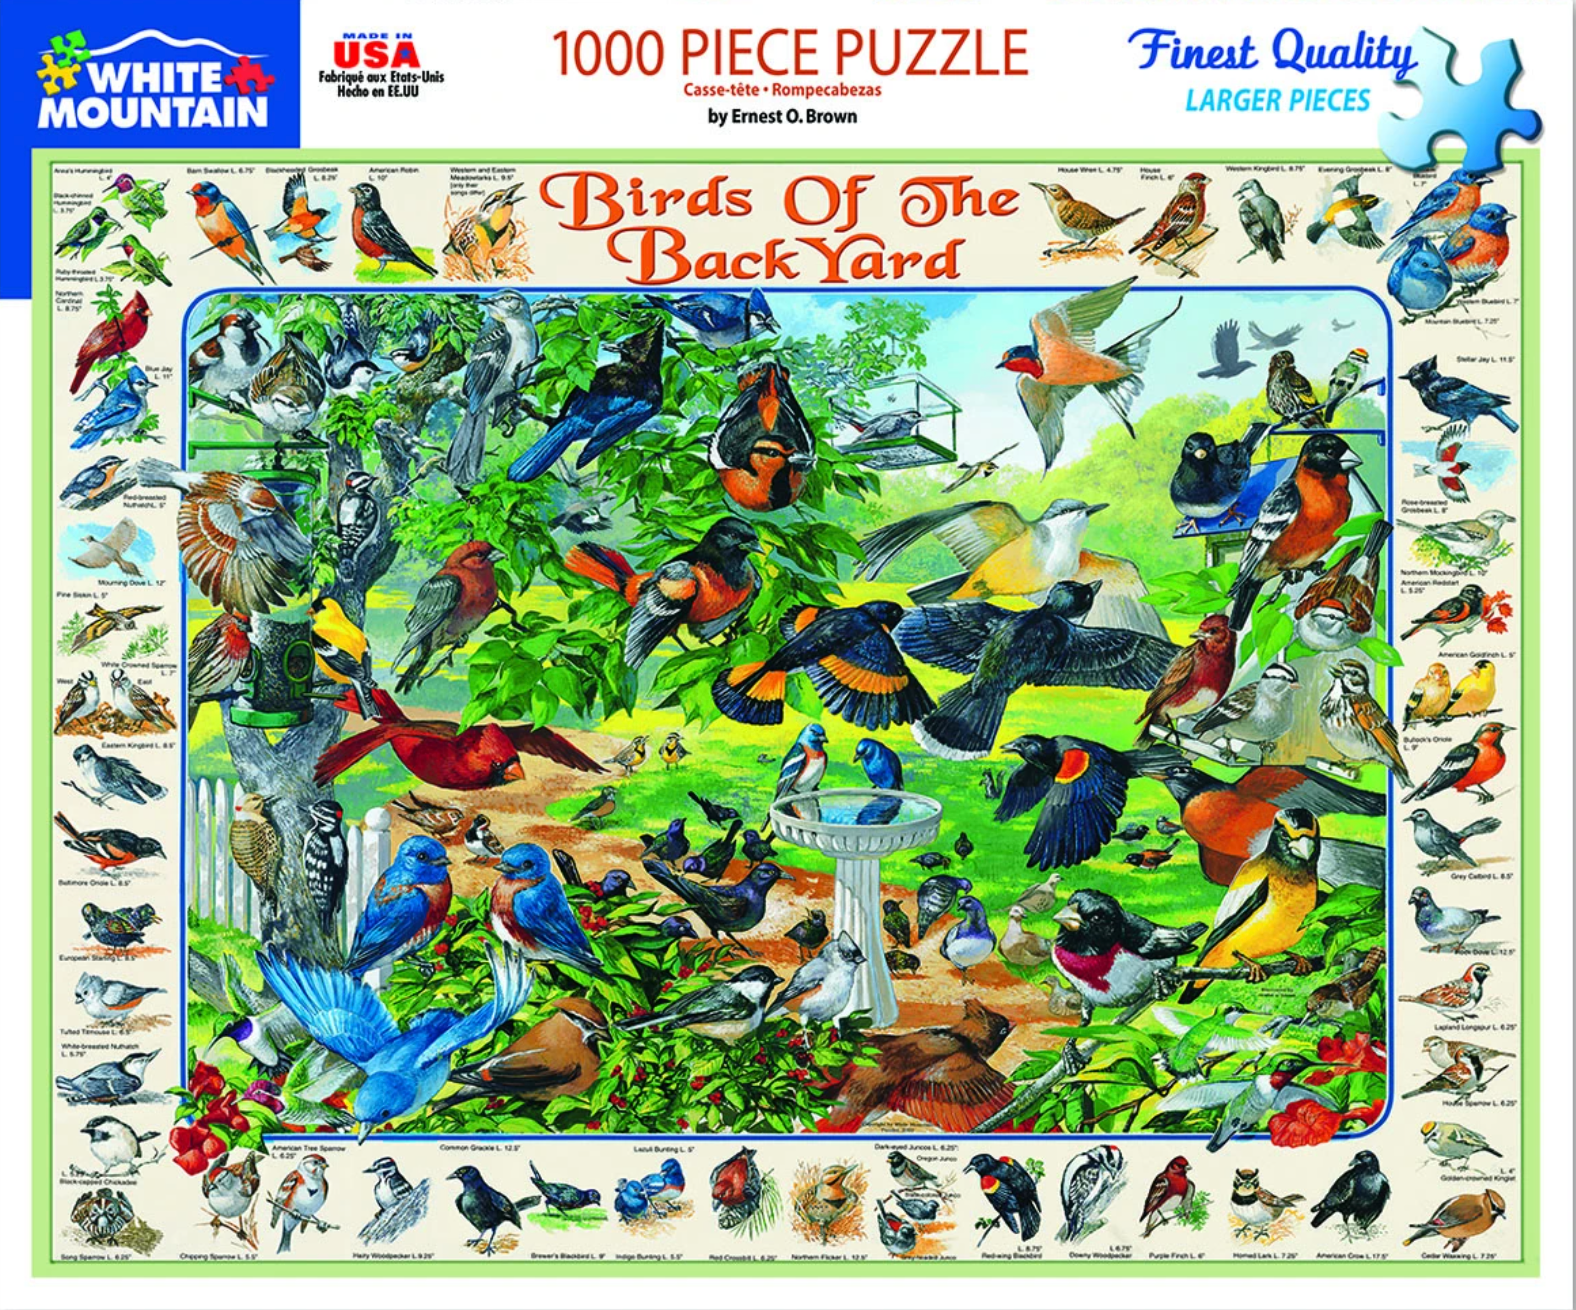 Birds of the Backyard (1000 pc puzzle)